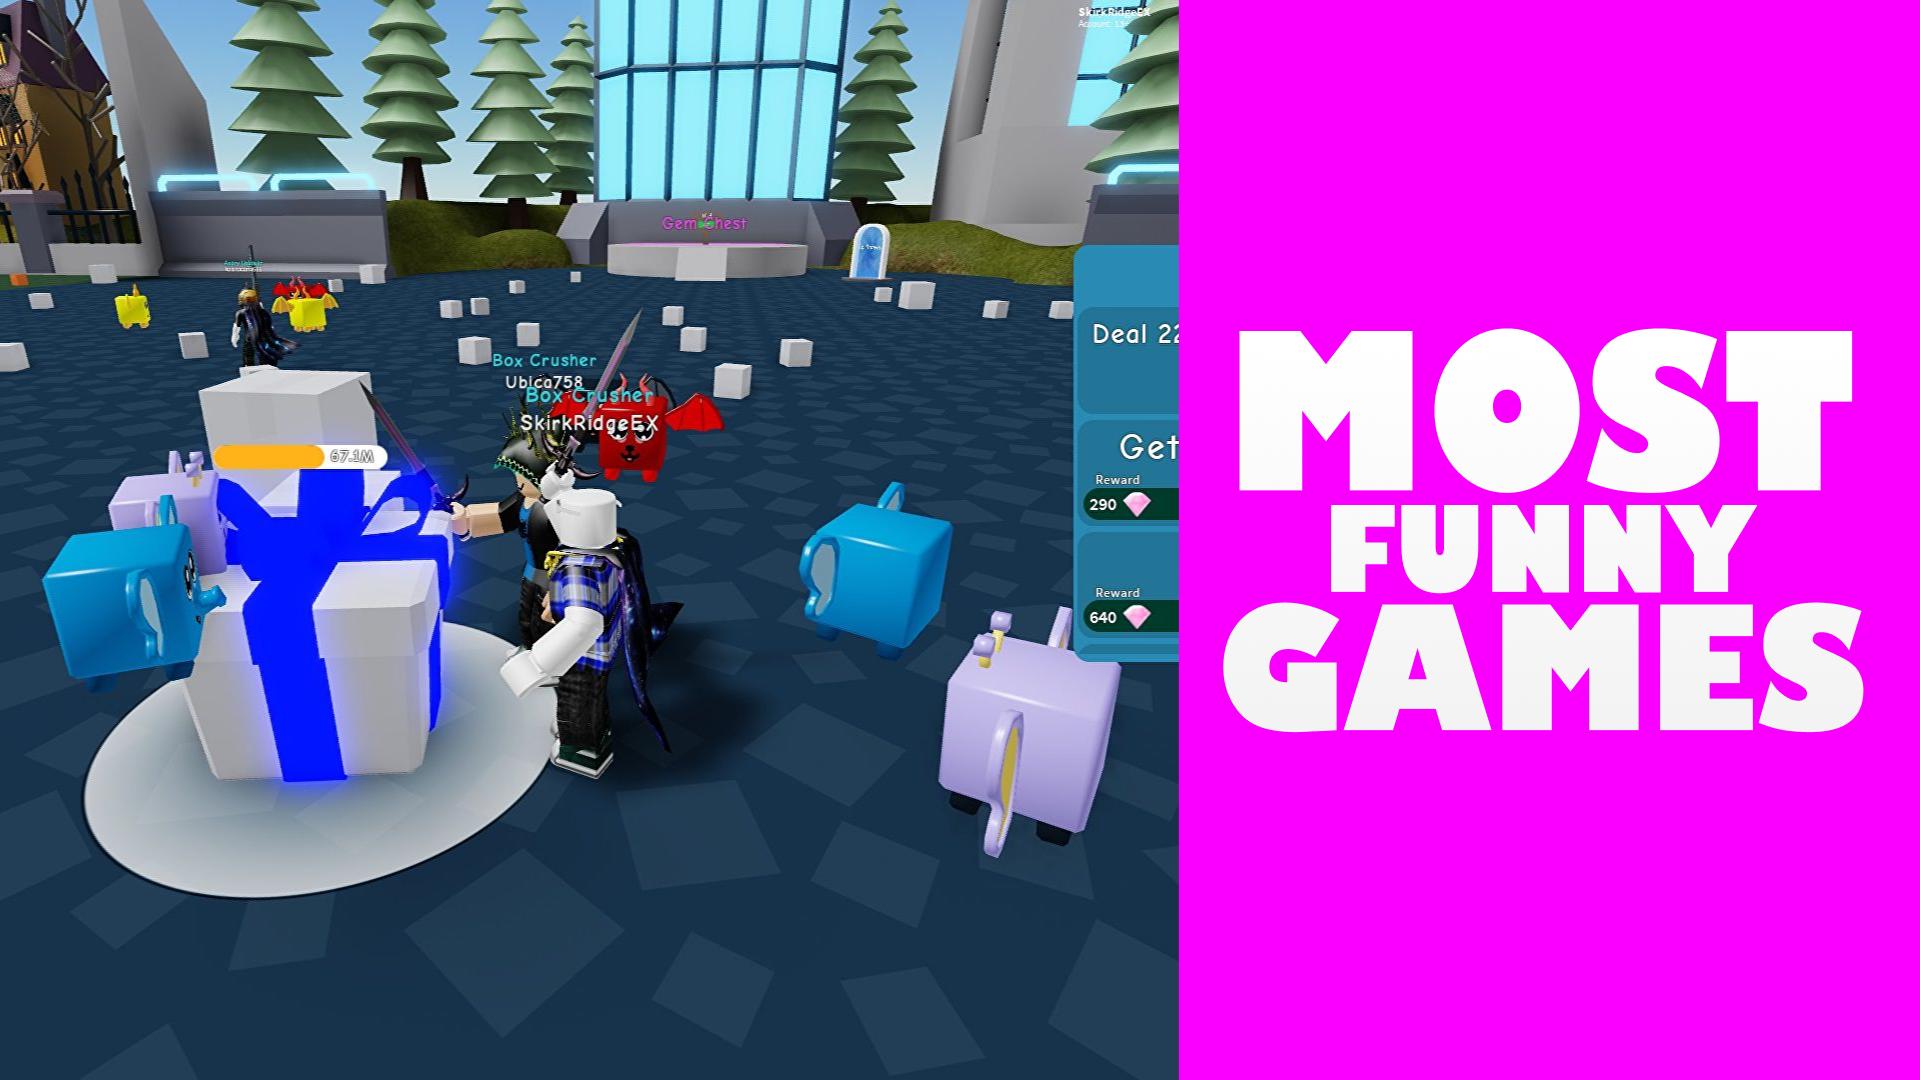 Download Ultra Mod Master for roblox App Free on PC (Emulator) - LDPlayer